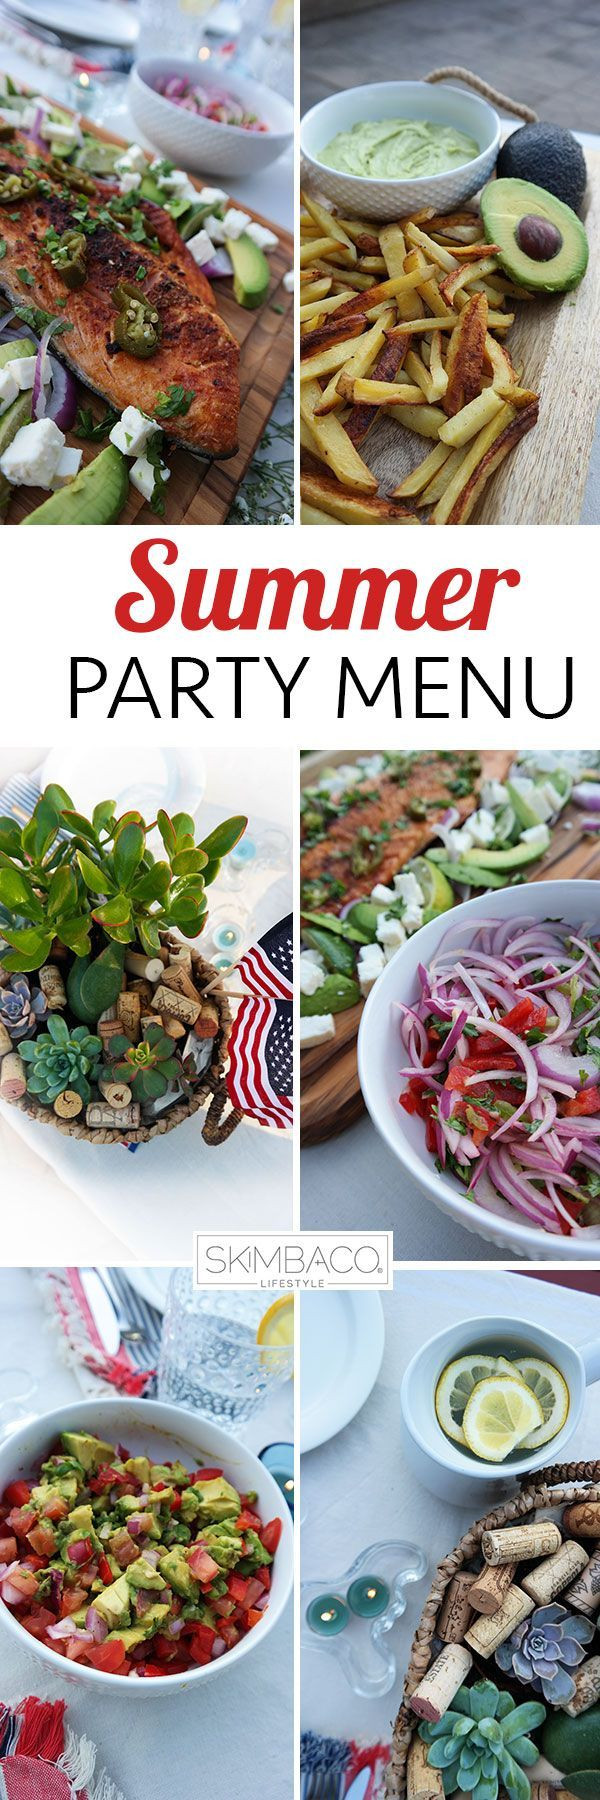 Summer Party Menu Ideas
 17 Best images about The Ultimate 4th of July on Pinterest